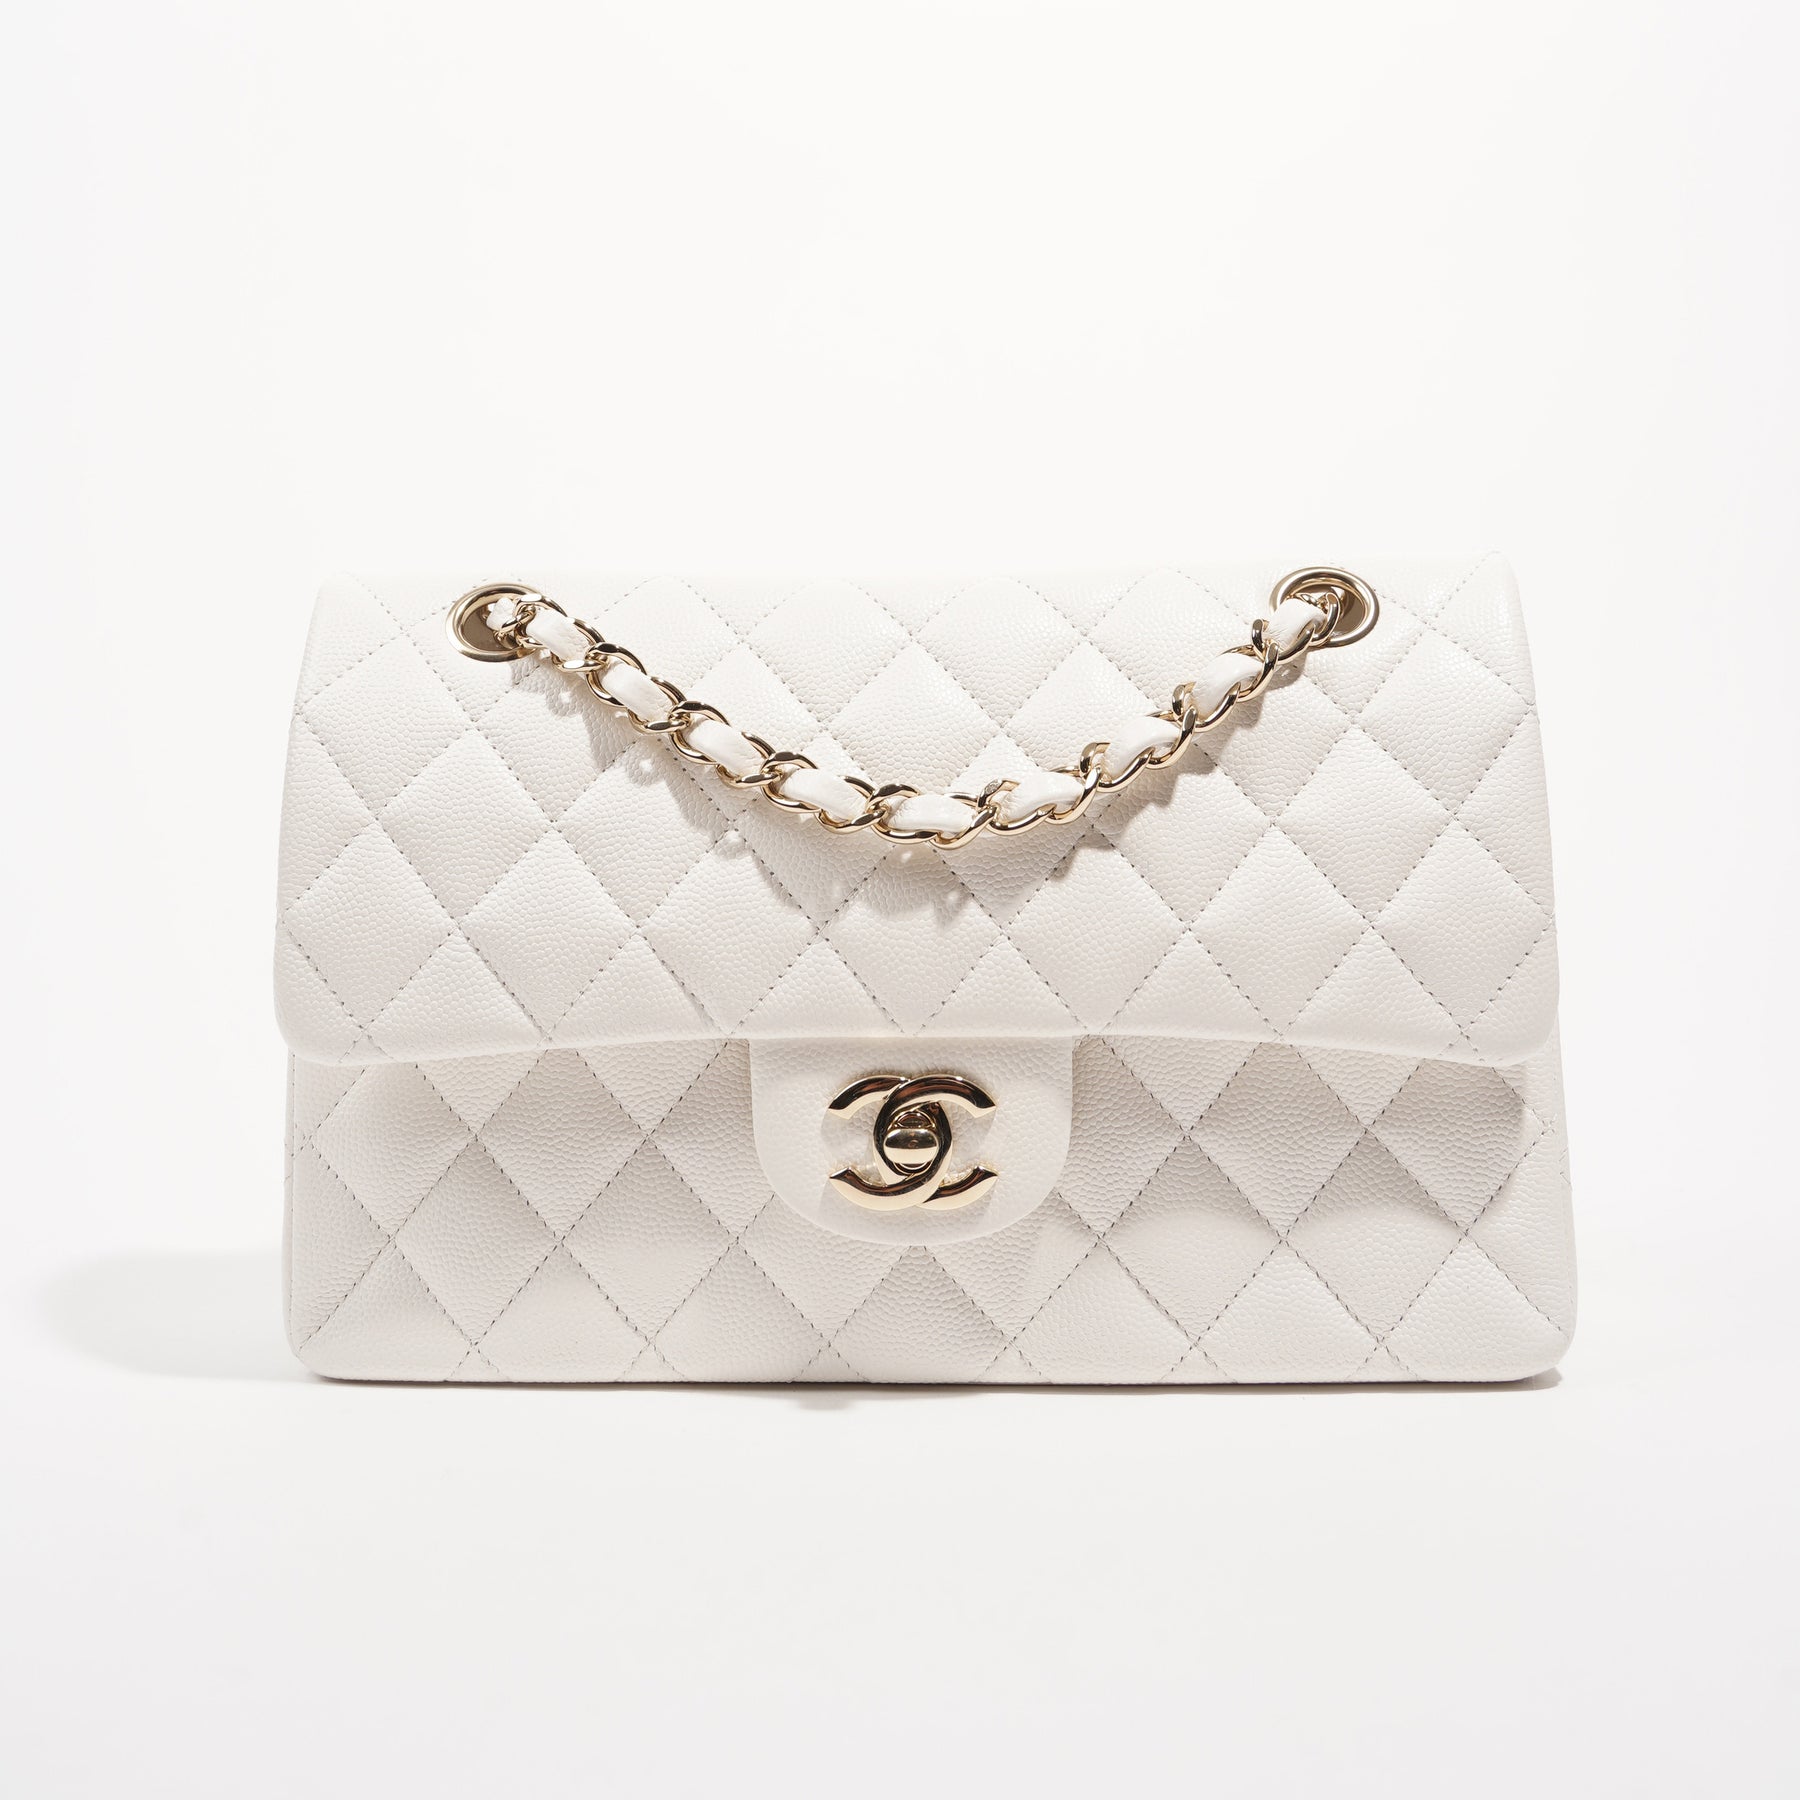 7 Street Looks for How to Style Your Chanel Classic Flap Bag